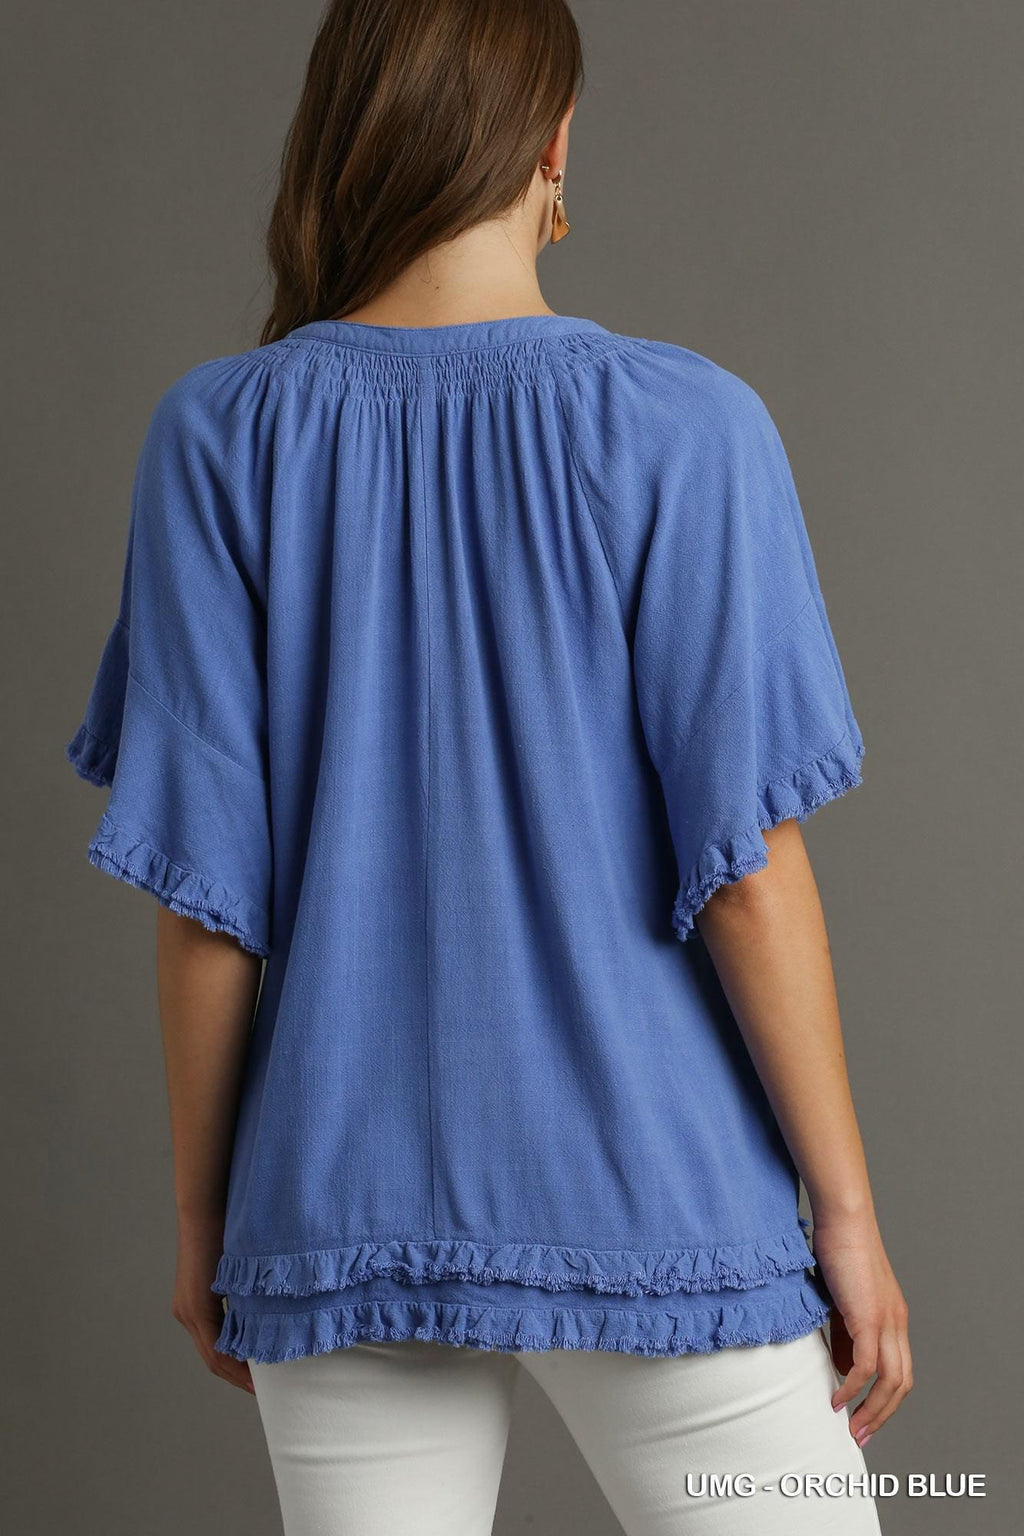 Orchid Blue Linen Boxy Cut Top by Umgee